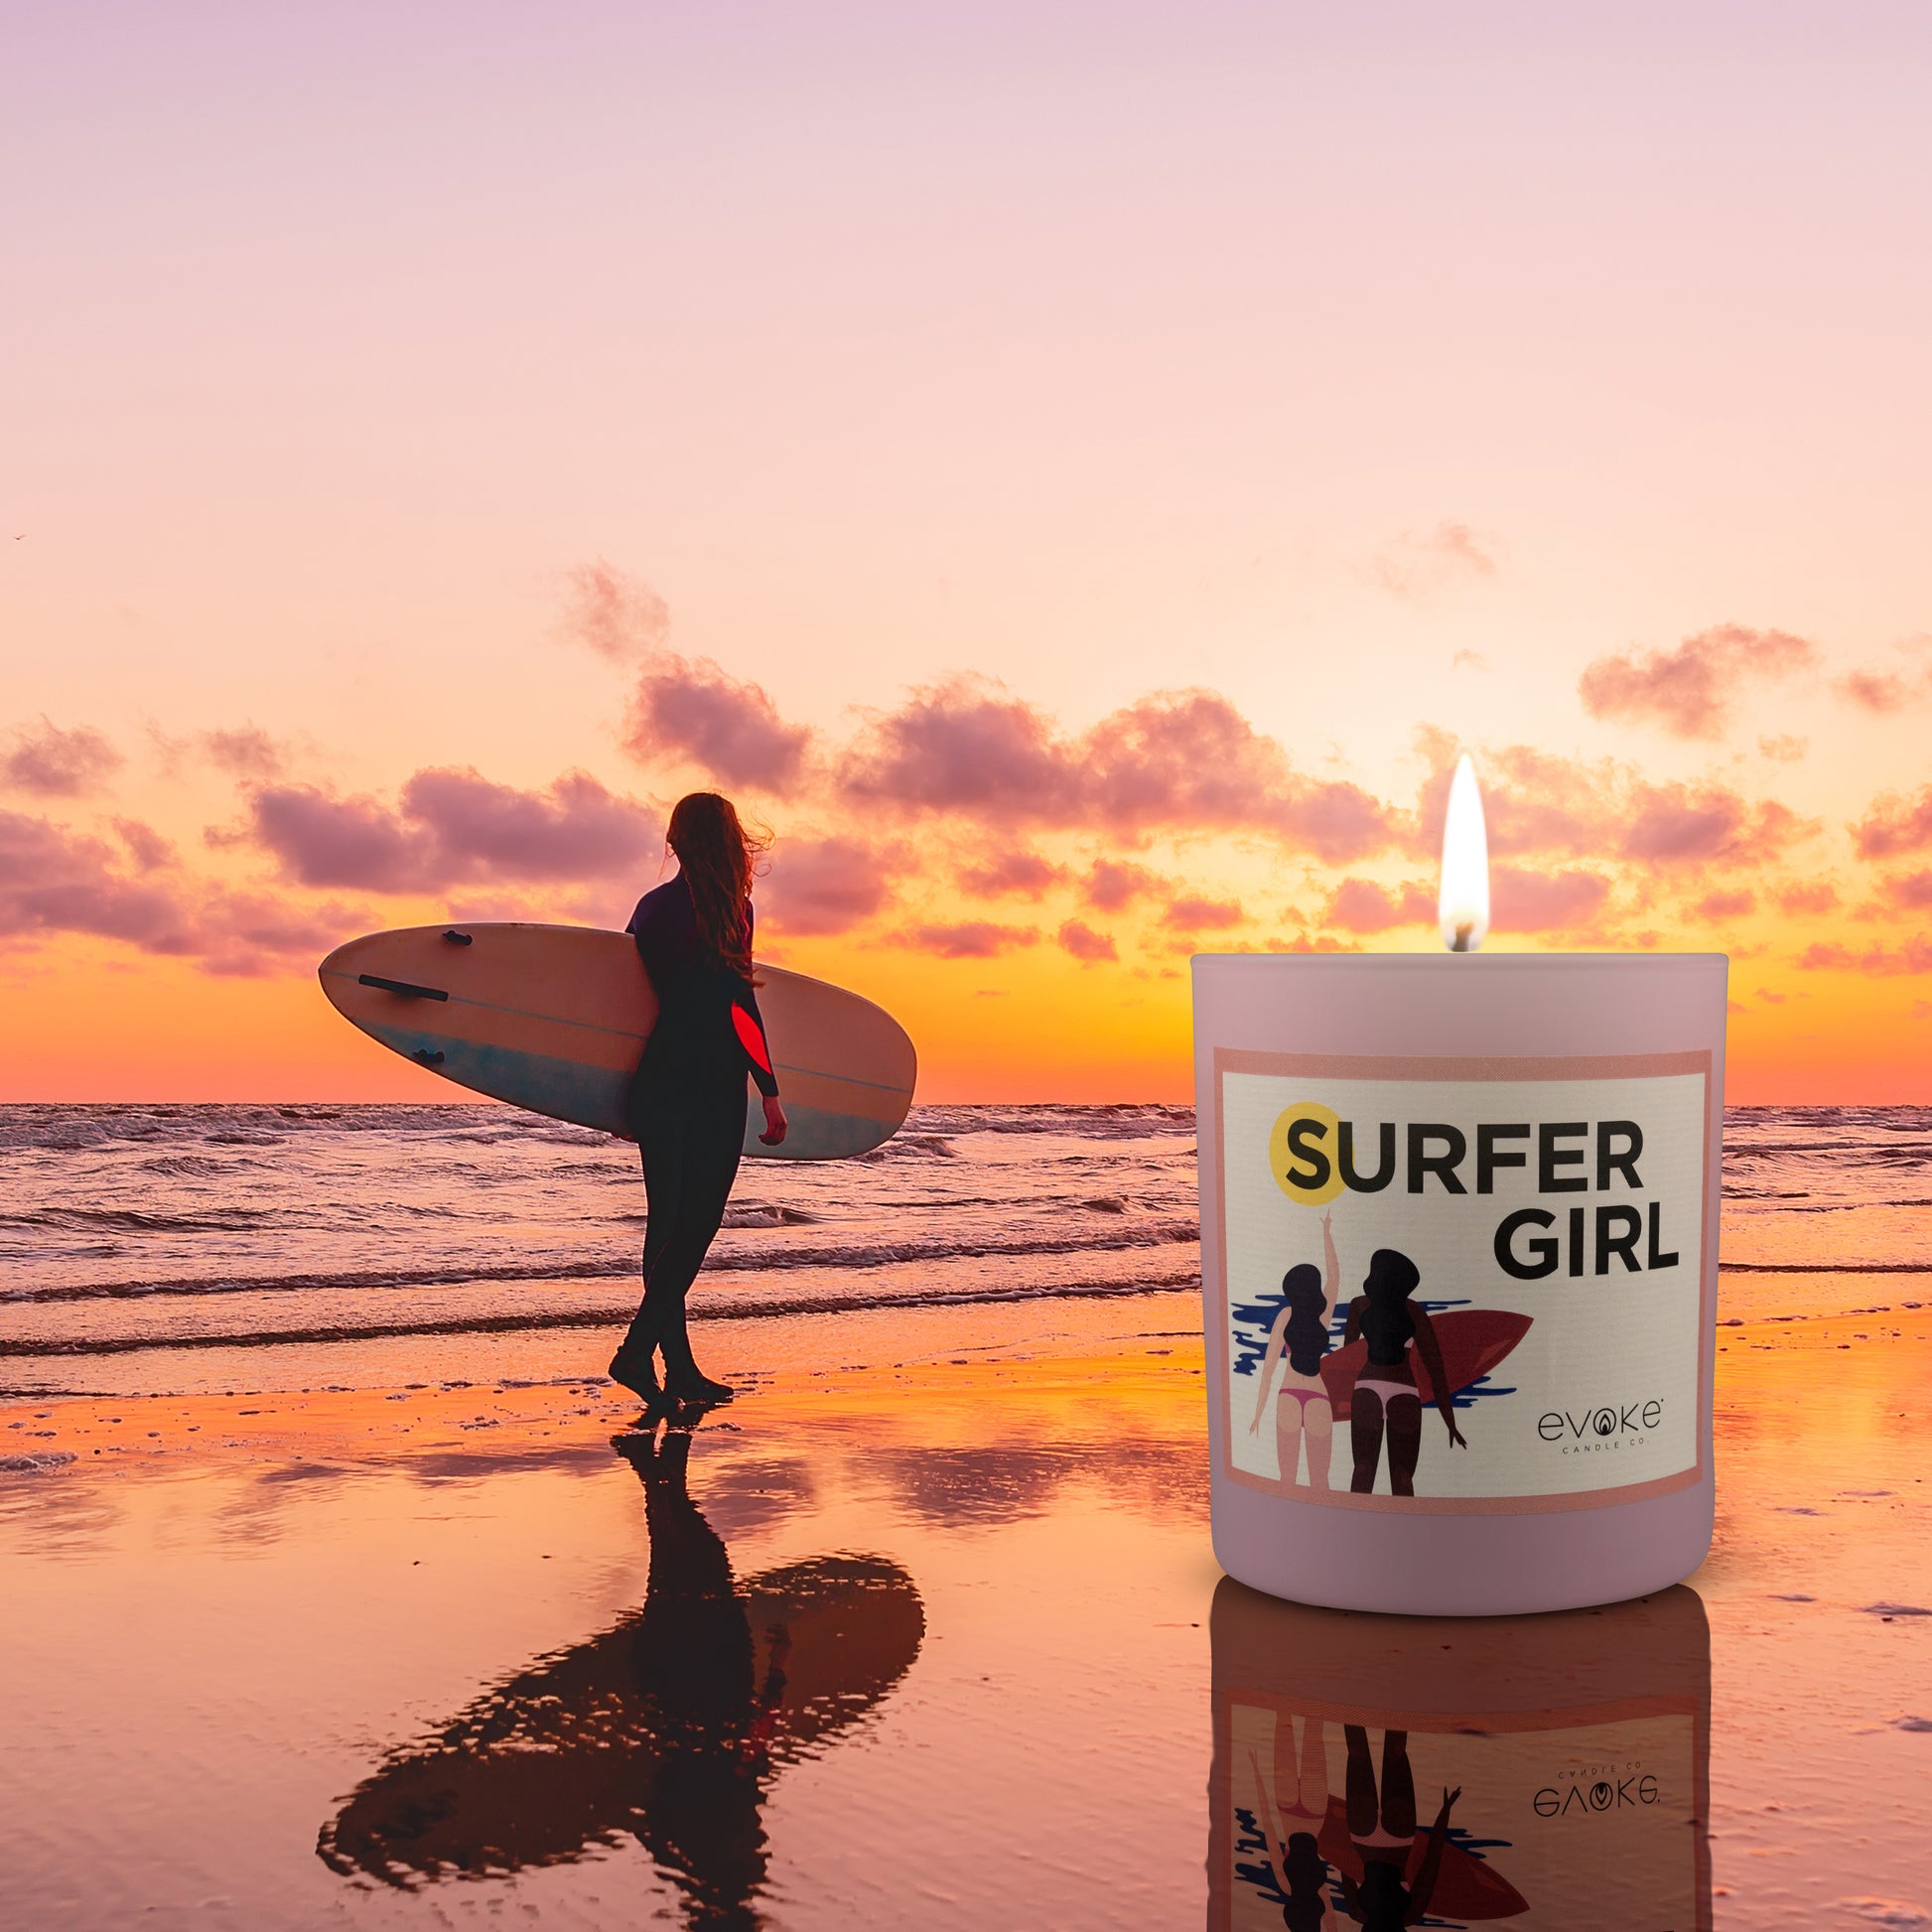 Surfer Girl - The Girl Collection - Evoke Candle Co